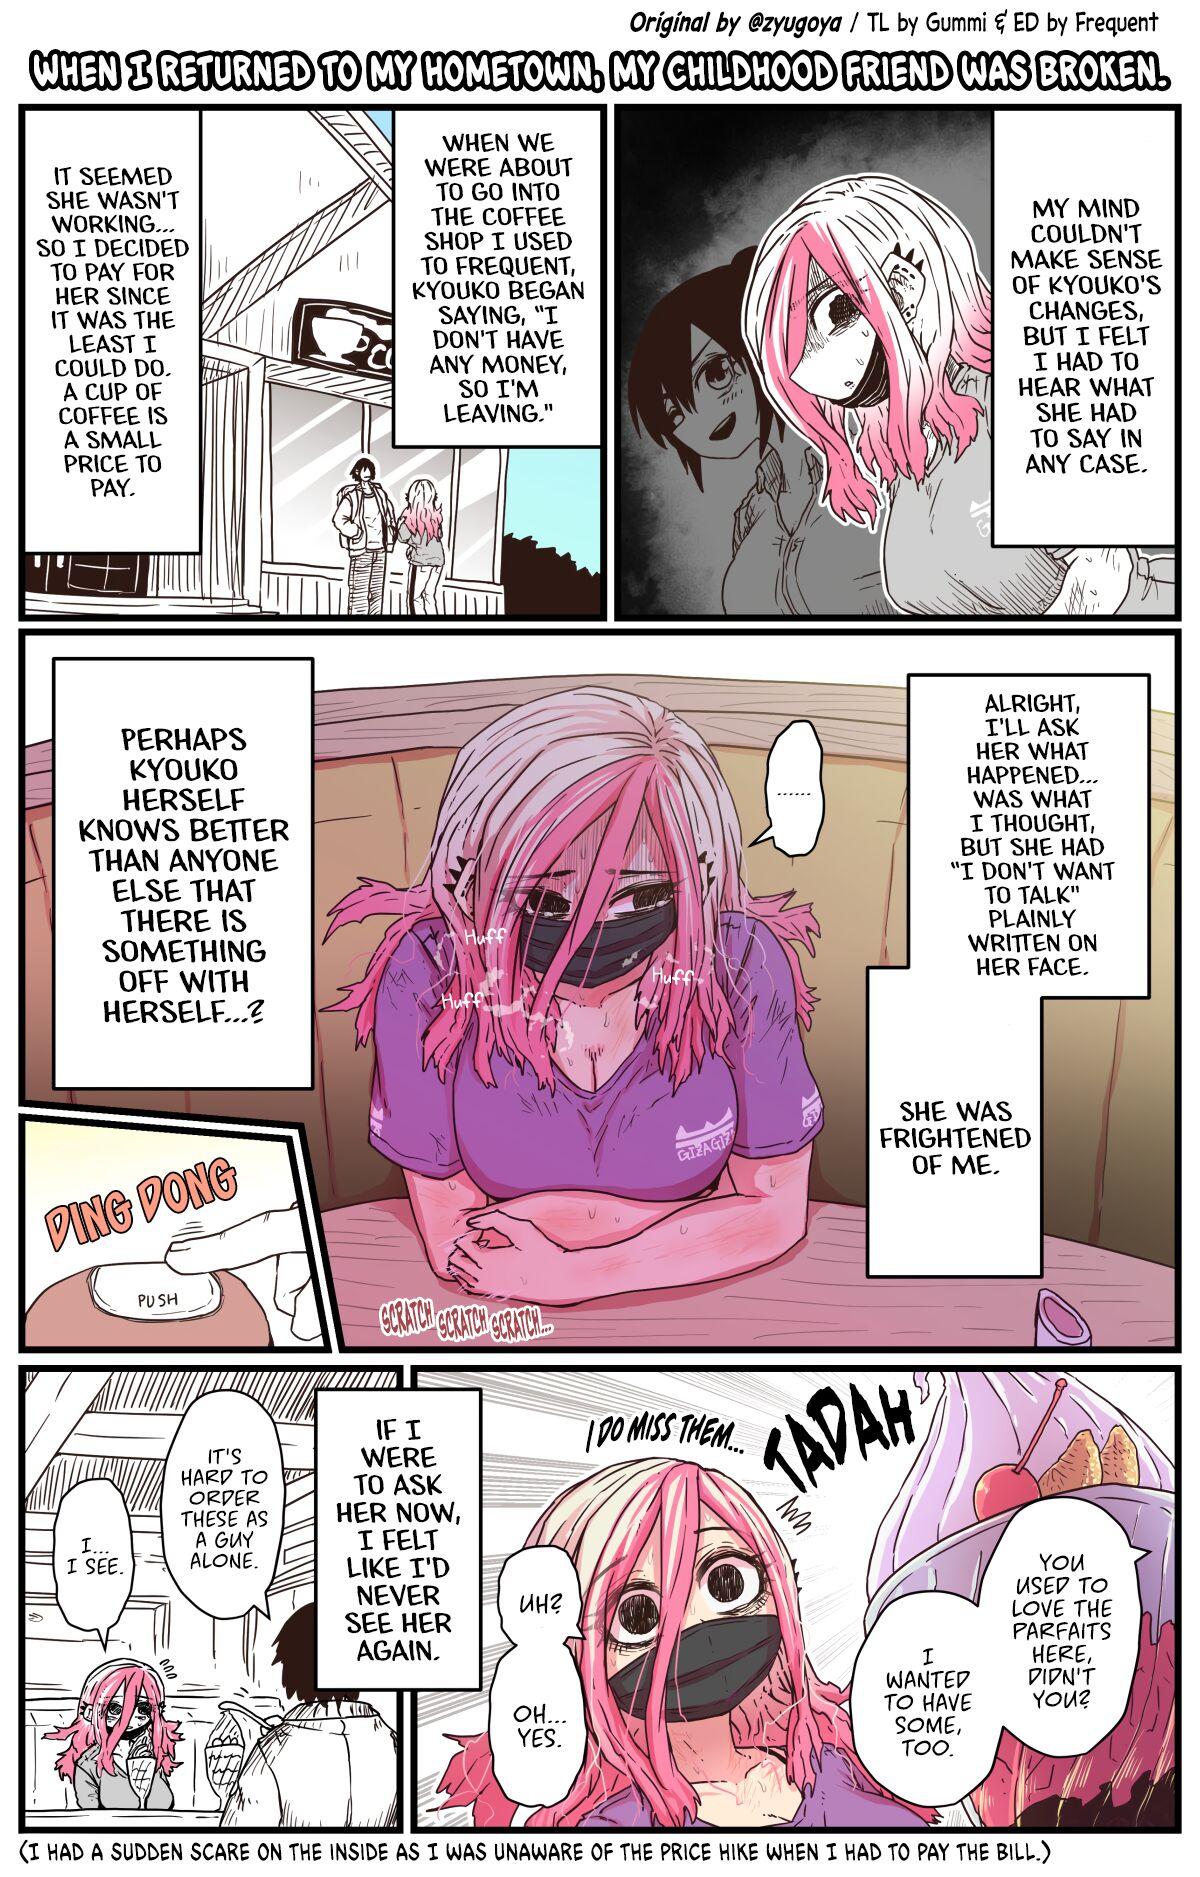 Room When I Returned to My Hometown, My Childhood Friend was Broken - Original Jerkoff - Page 4